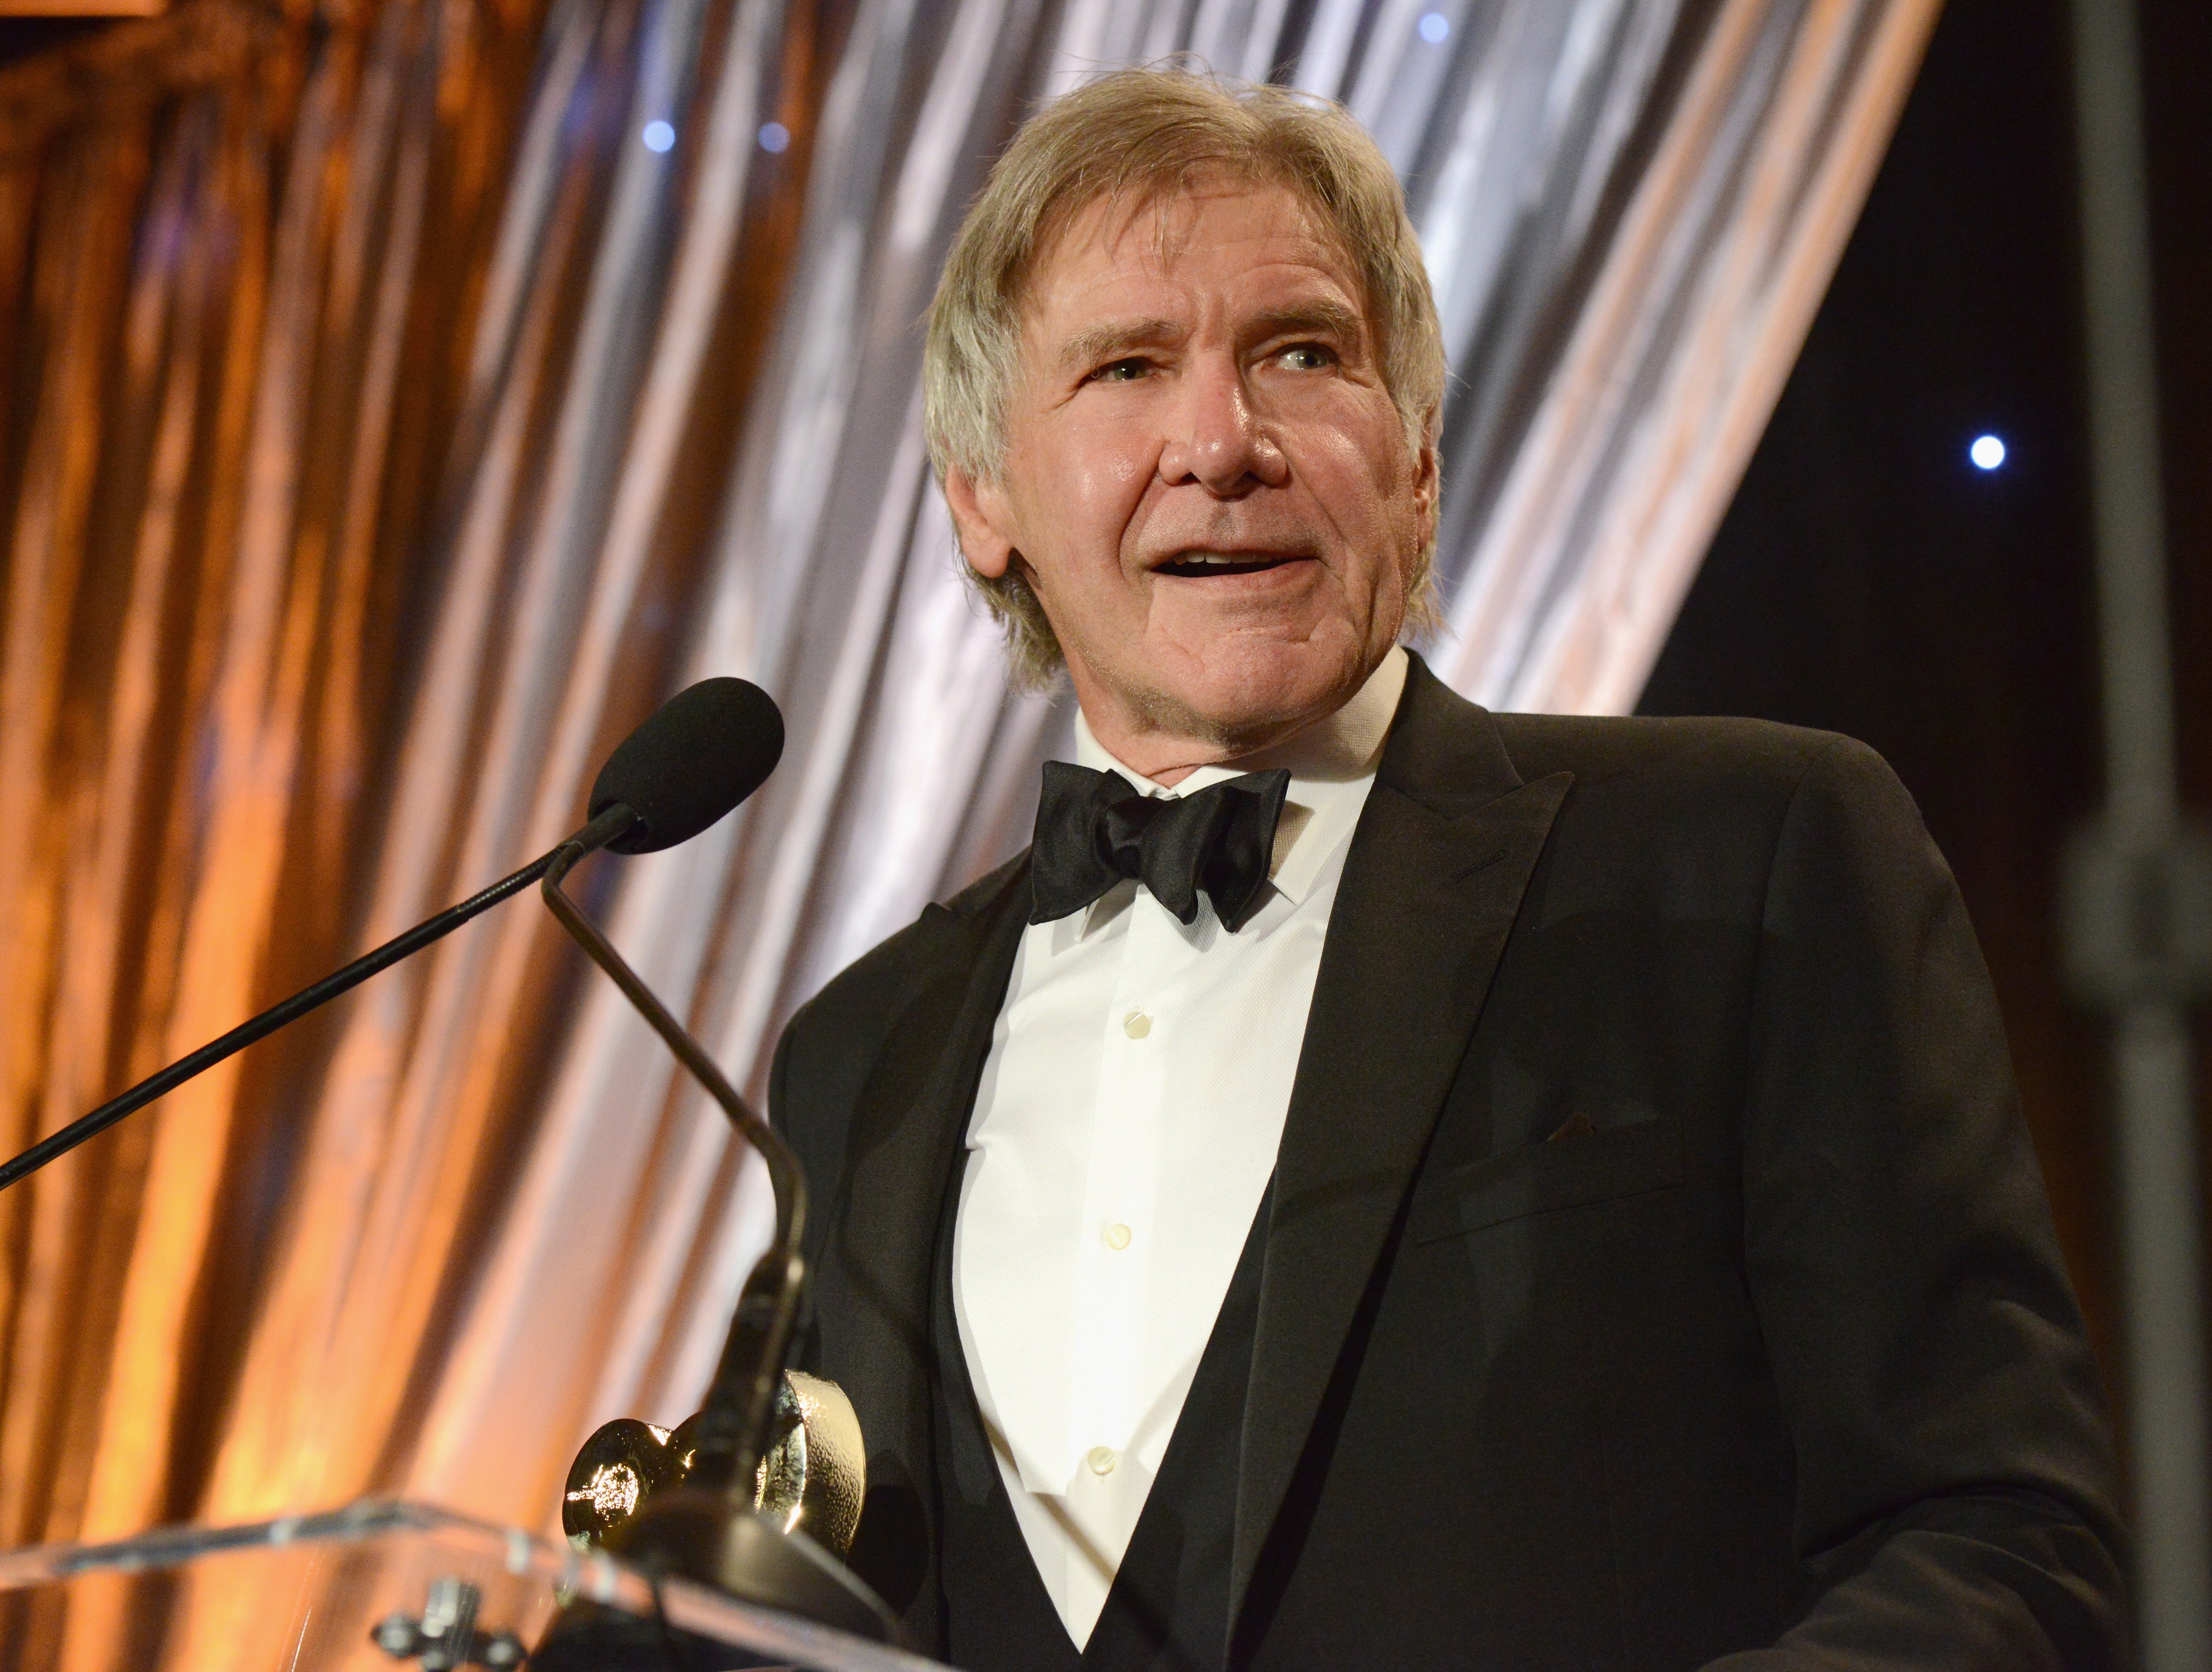 Actor Harrison Ford accepts the SOC President's Award at The Society Of Camera Operators 40th Annual Lifetime Achievement Awards held at Loews Hollywood Hotel on January 26, 2019 in Hollywood, California. (Albert L. Ortega—Getty Images)